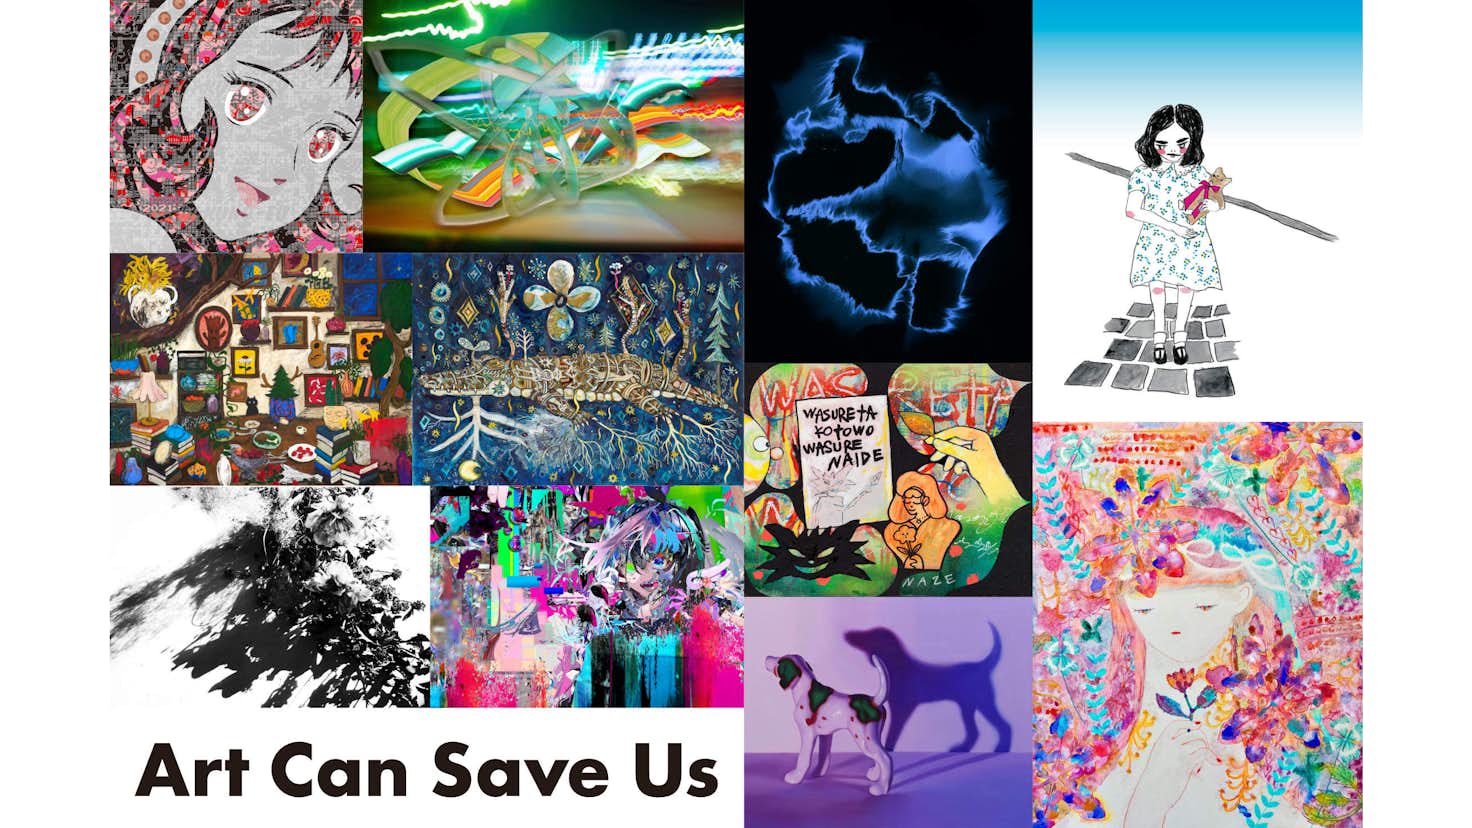 art can save us 細倉真弓